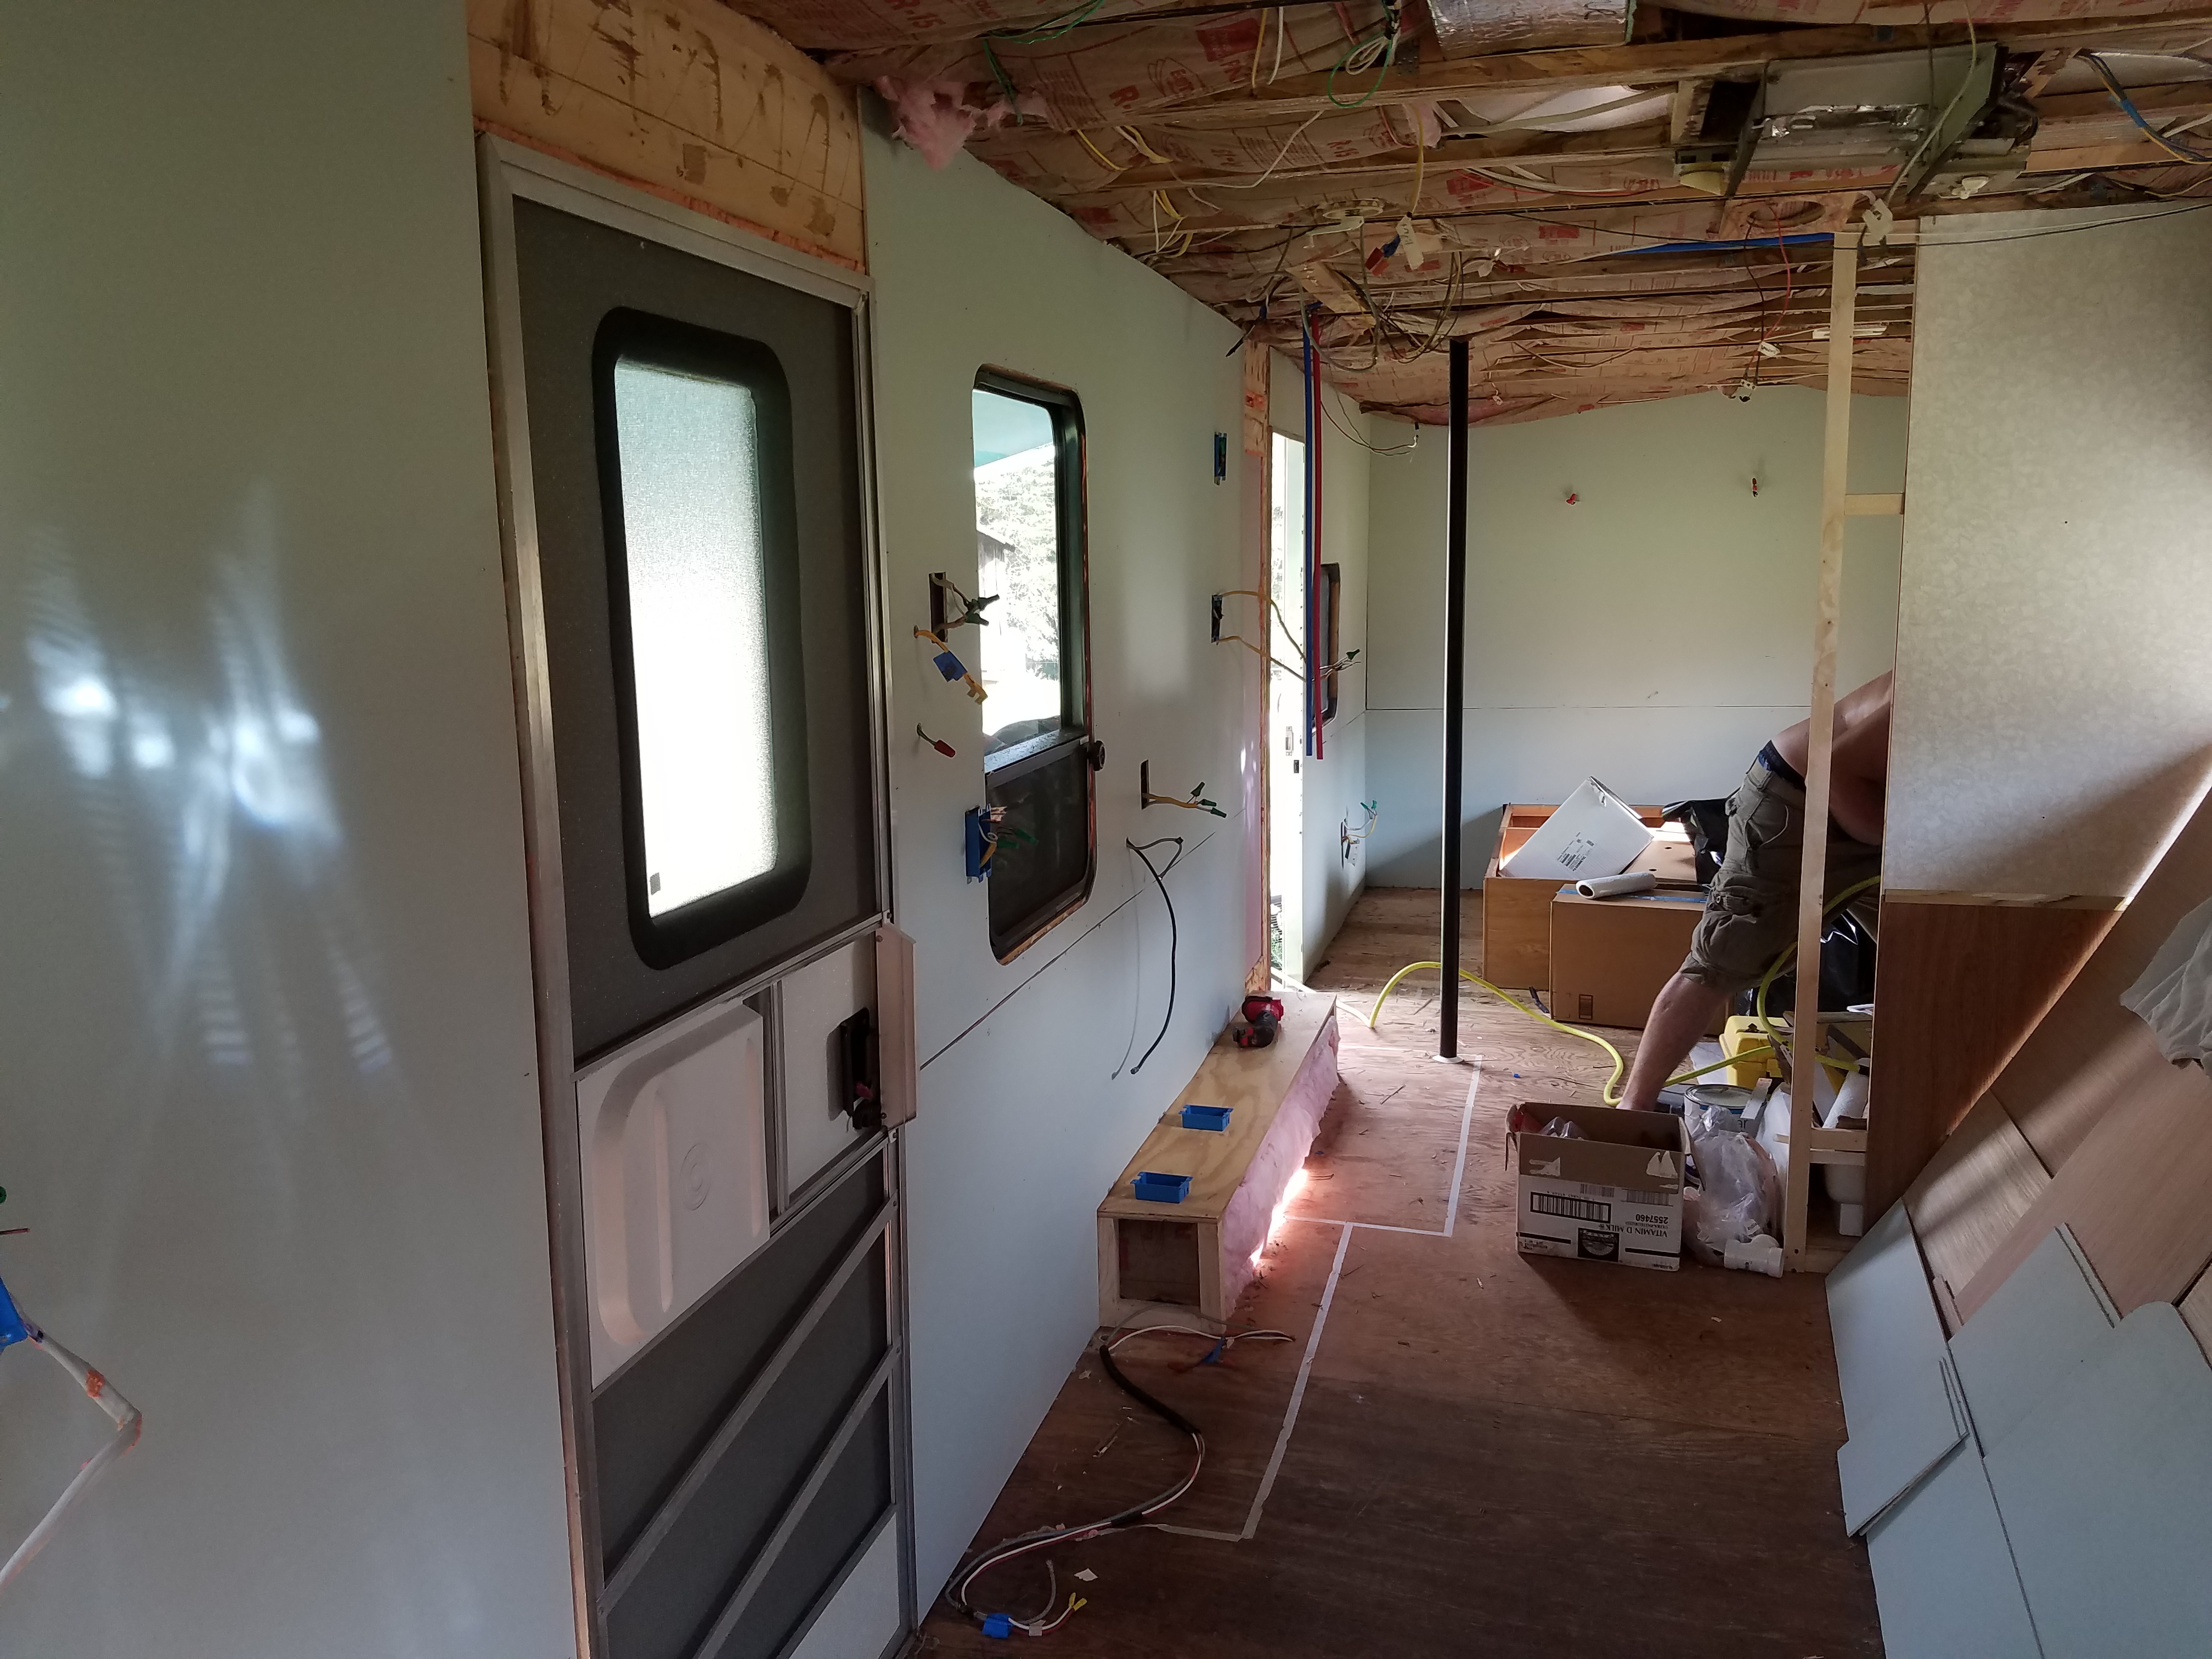 The paneled walls inside the travel trailer